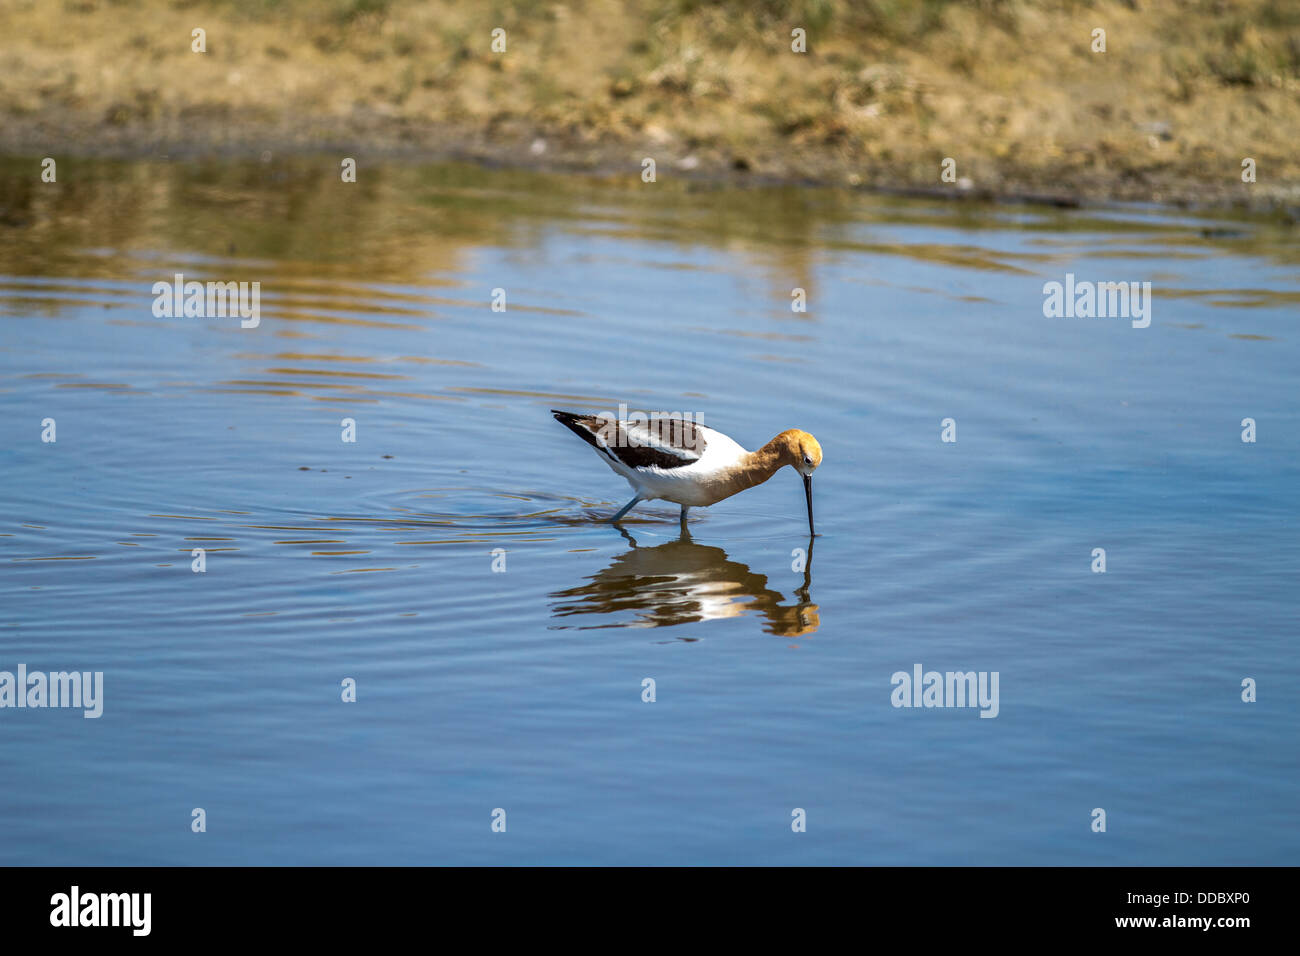 American Avocet (Recurvirostra americana) Beautiful colorful bird, dipping long bill in blue water, with mirrored reflection. Stock Photo